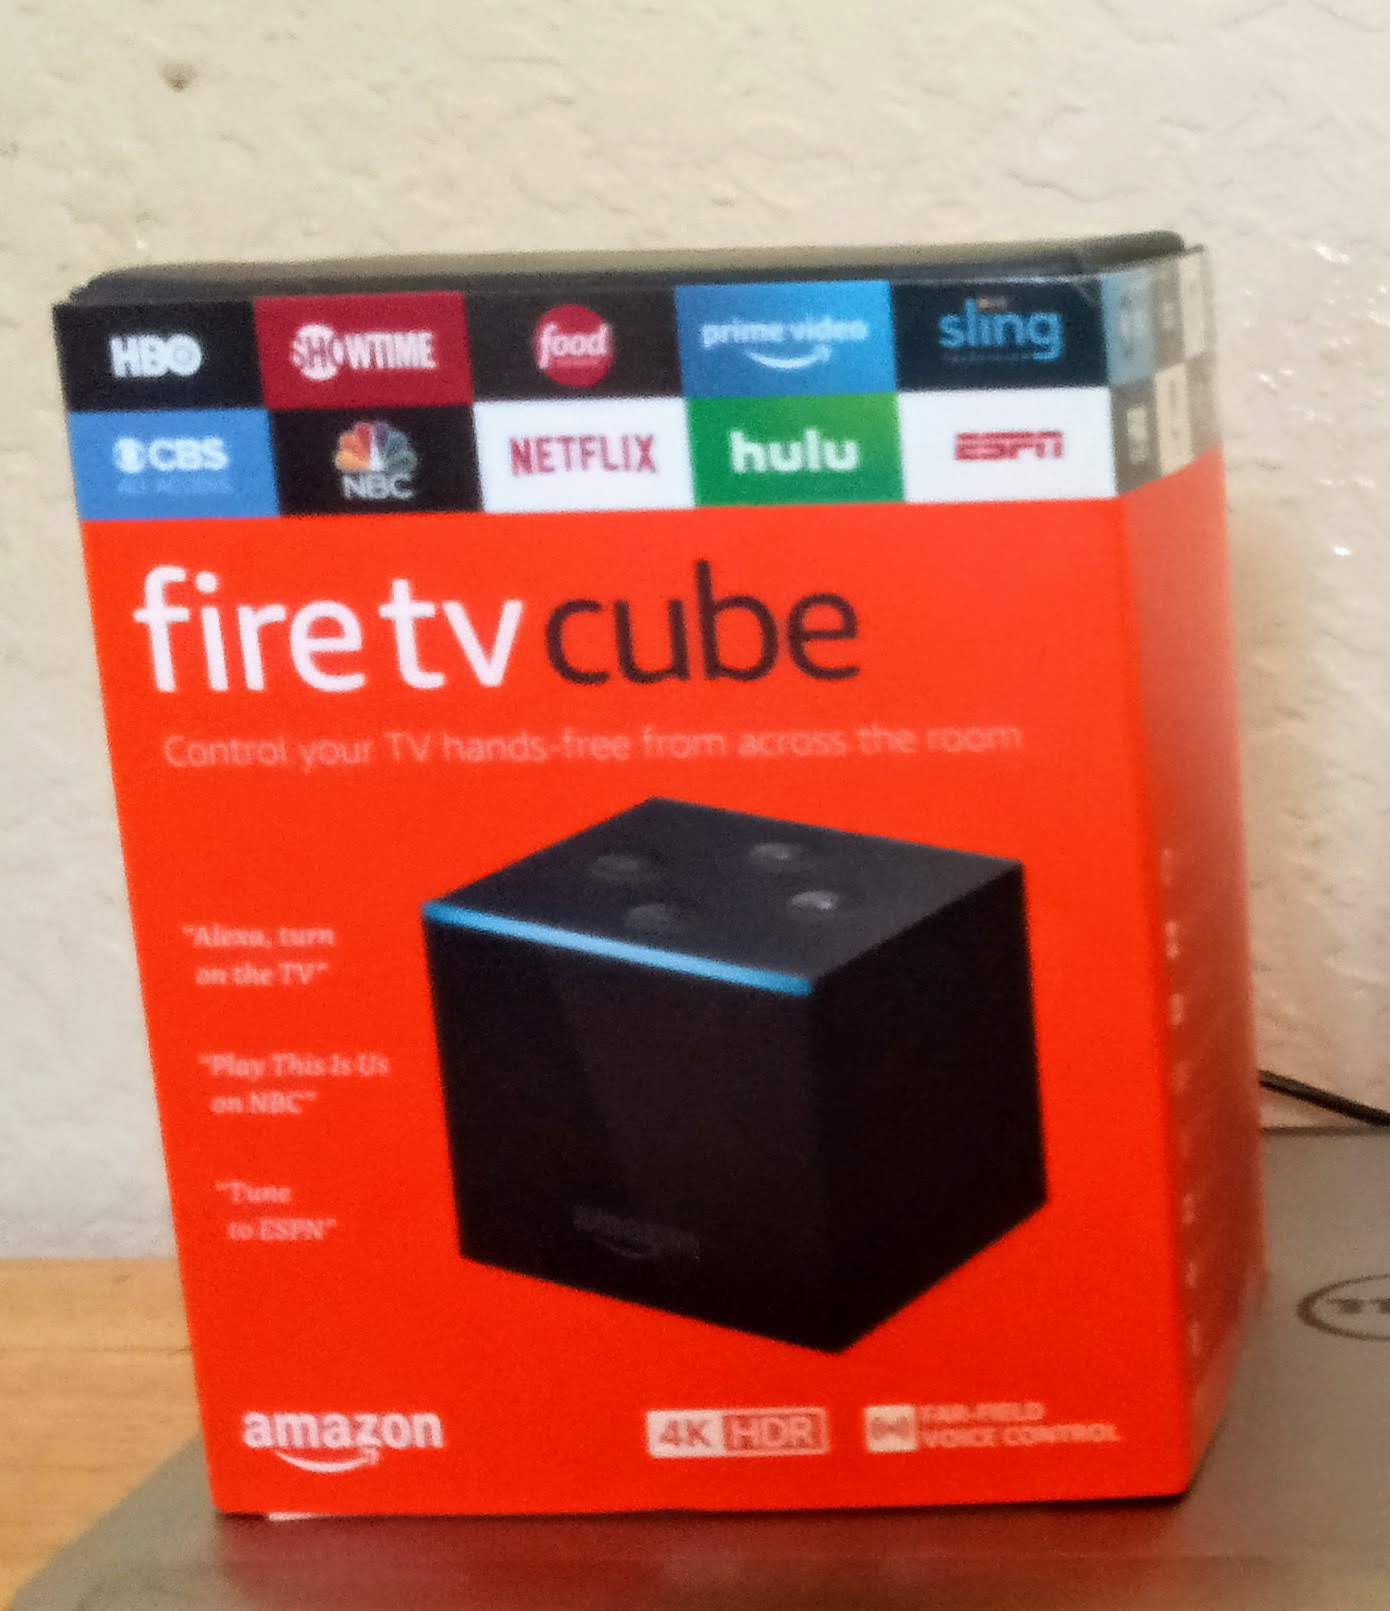 Amazon- Fire TV Cube 16GB 2nd Generation Media Streaming Media Player with built in Alexa Voice Remote - Black